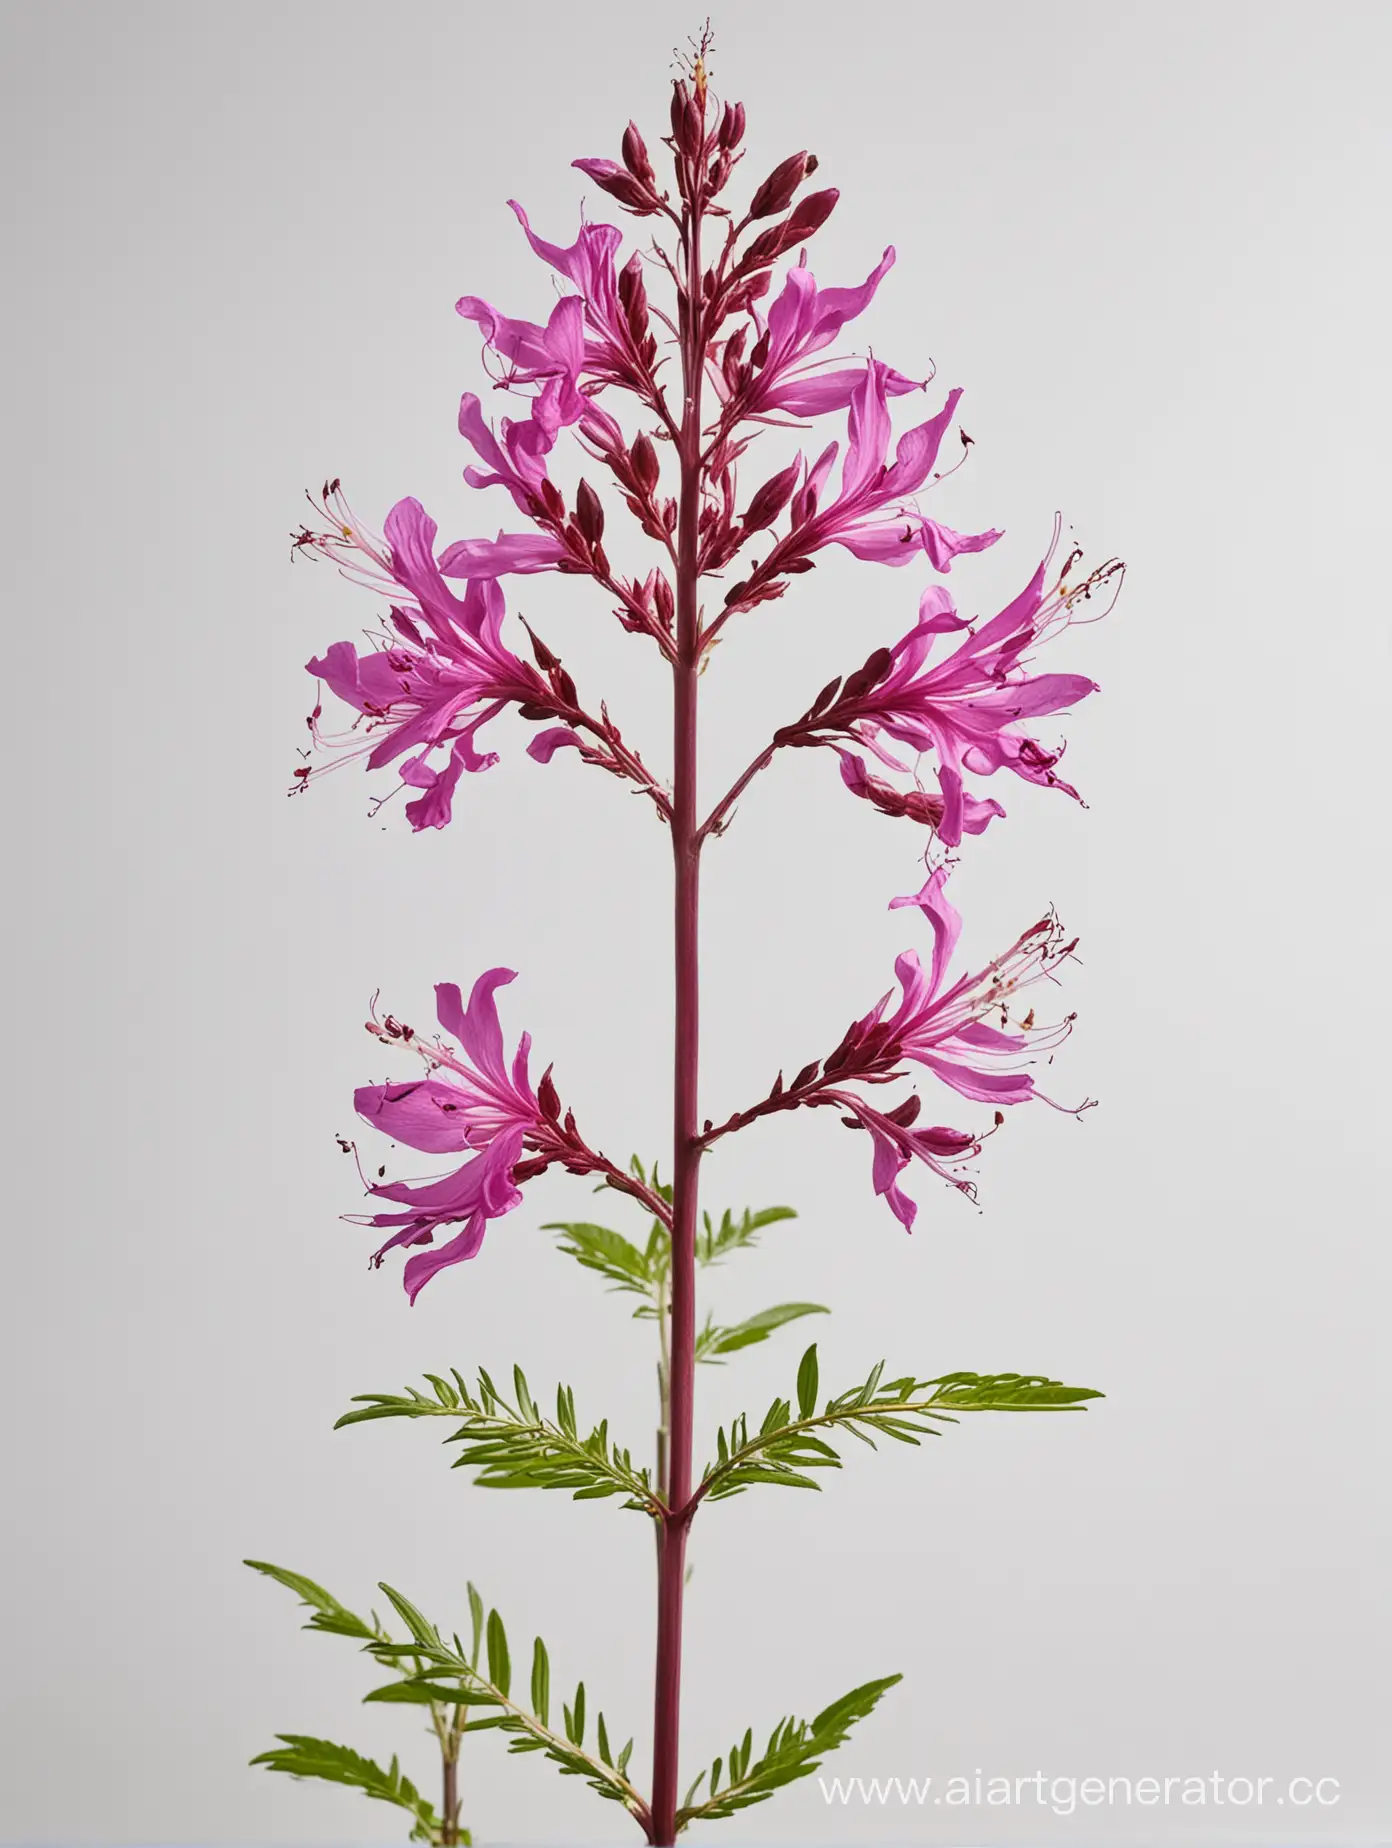 CloseUp-Vibrant-Fireweed-Wildflower-on-White-Background